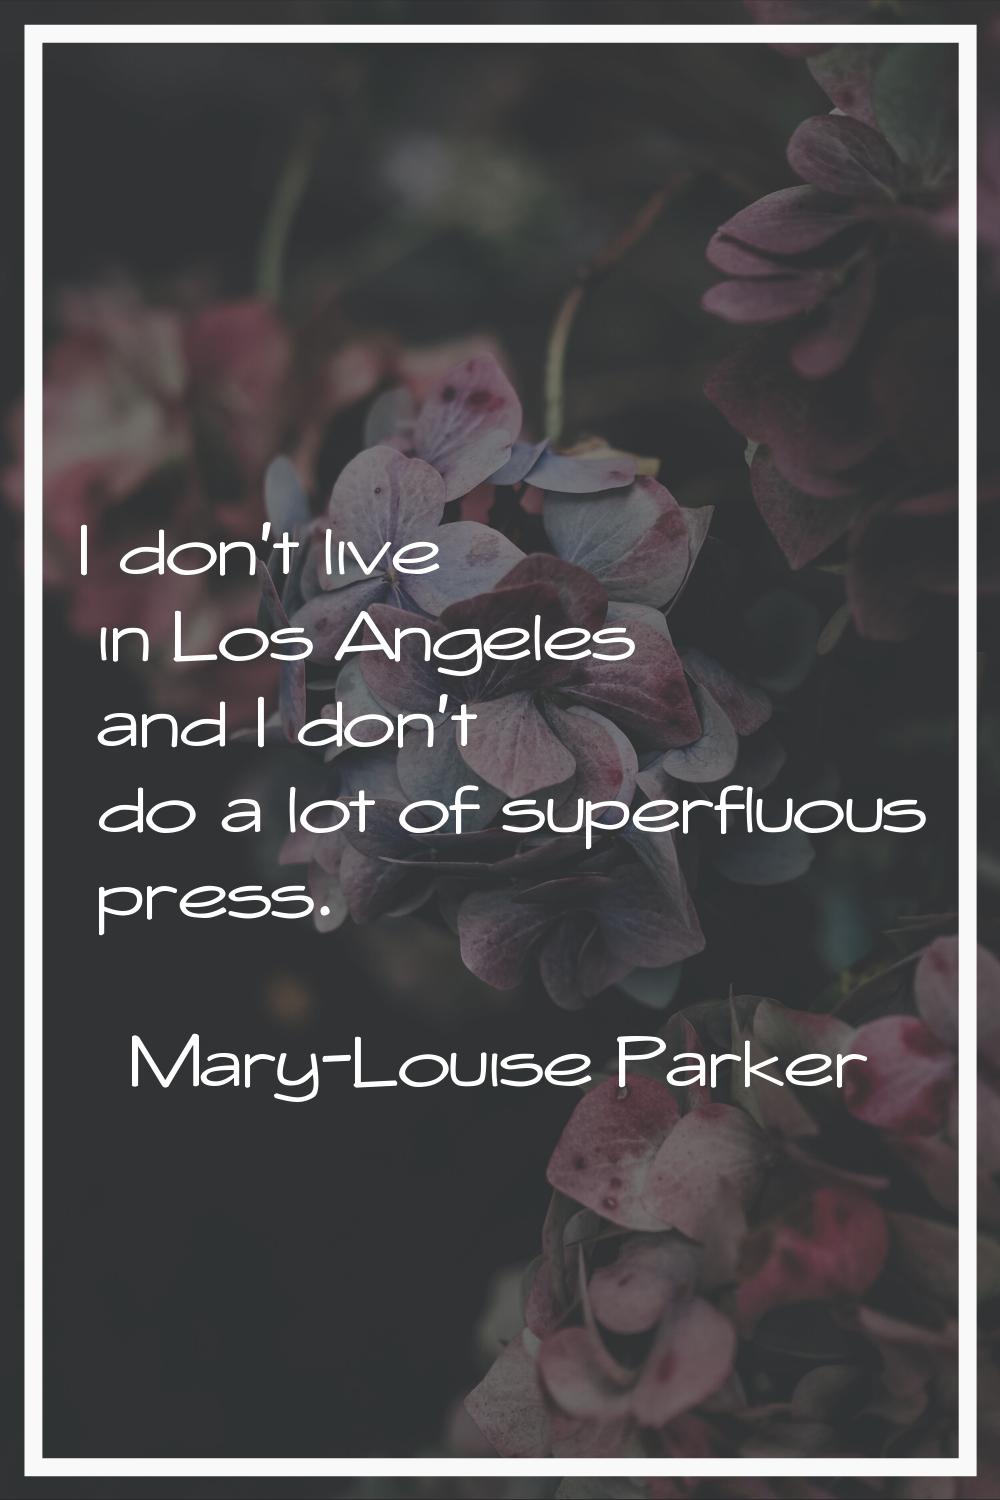 I don't live in Los Angeles and I don't do a lot of superfluous press.